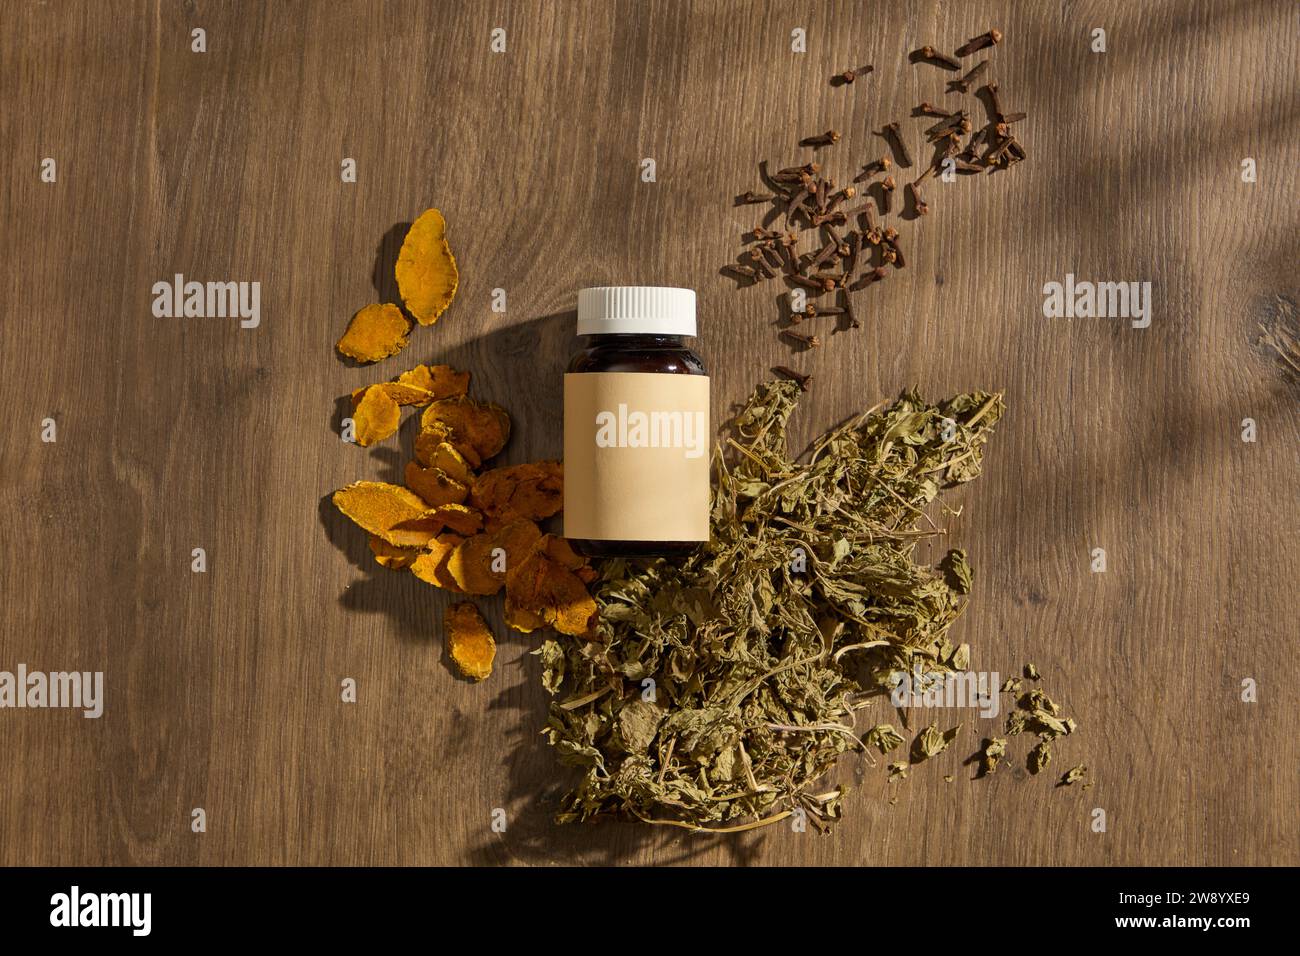 Top view of an amber bottle unlabeled displayed on wooden table background with traditional medicines. Turmeric, mint and cloves are all folk medicine Stock Photo